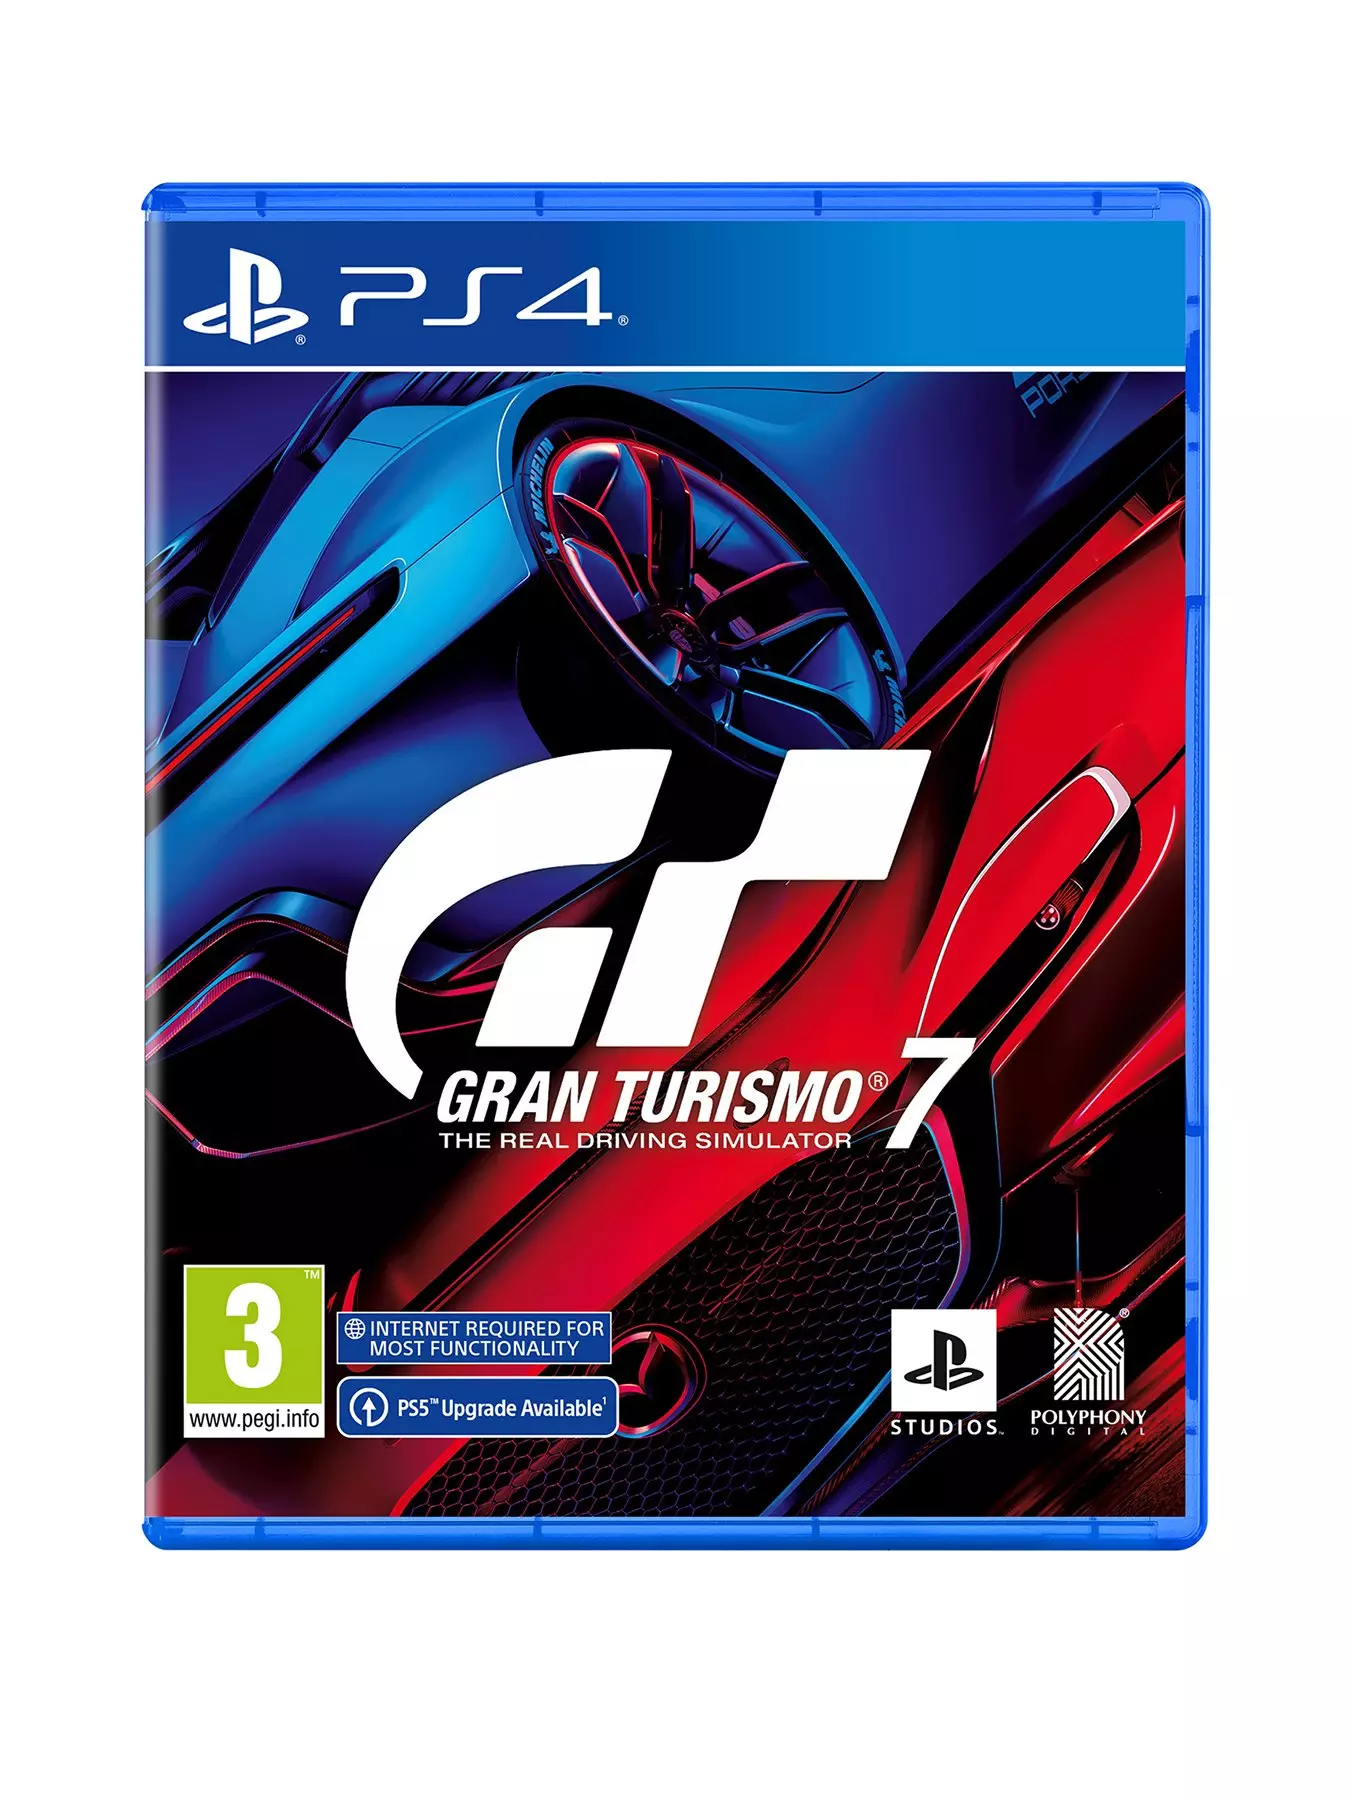 Gran Turismo 7 illustrates the folly of always-online games